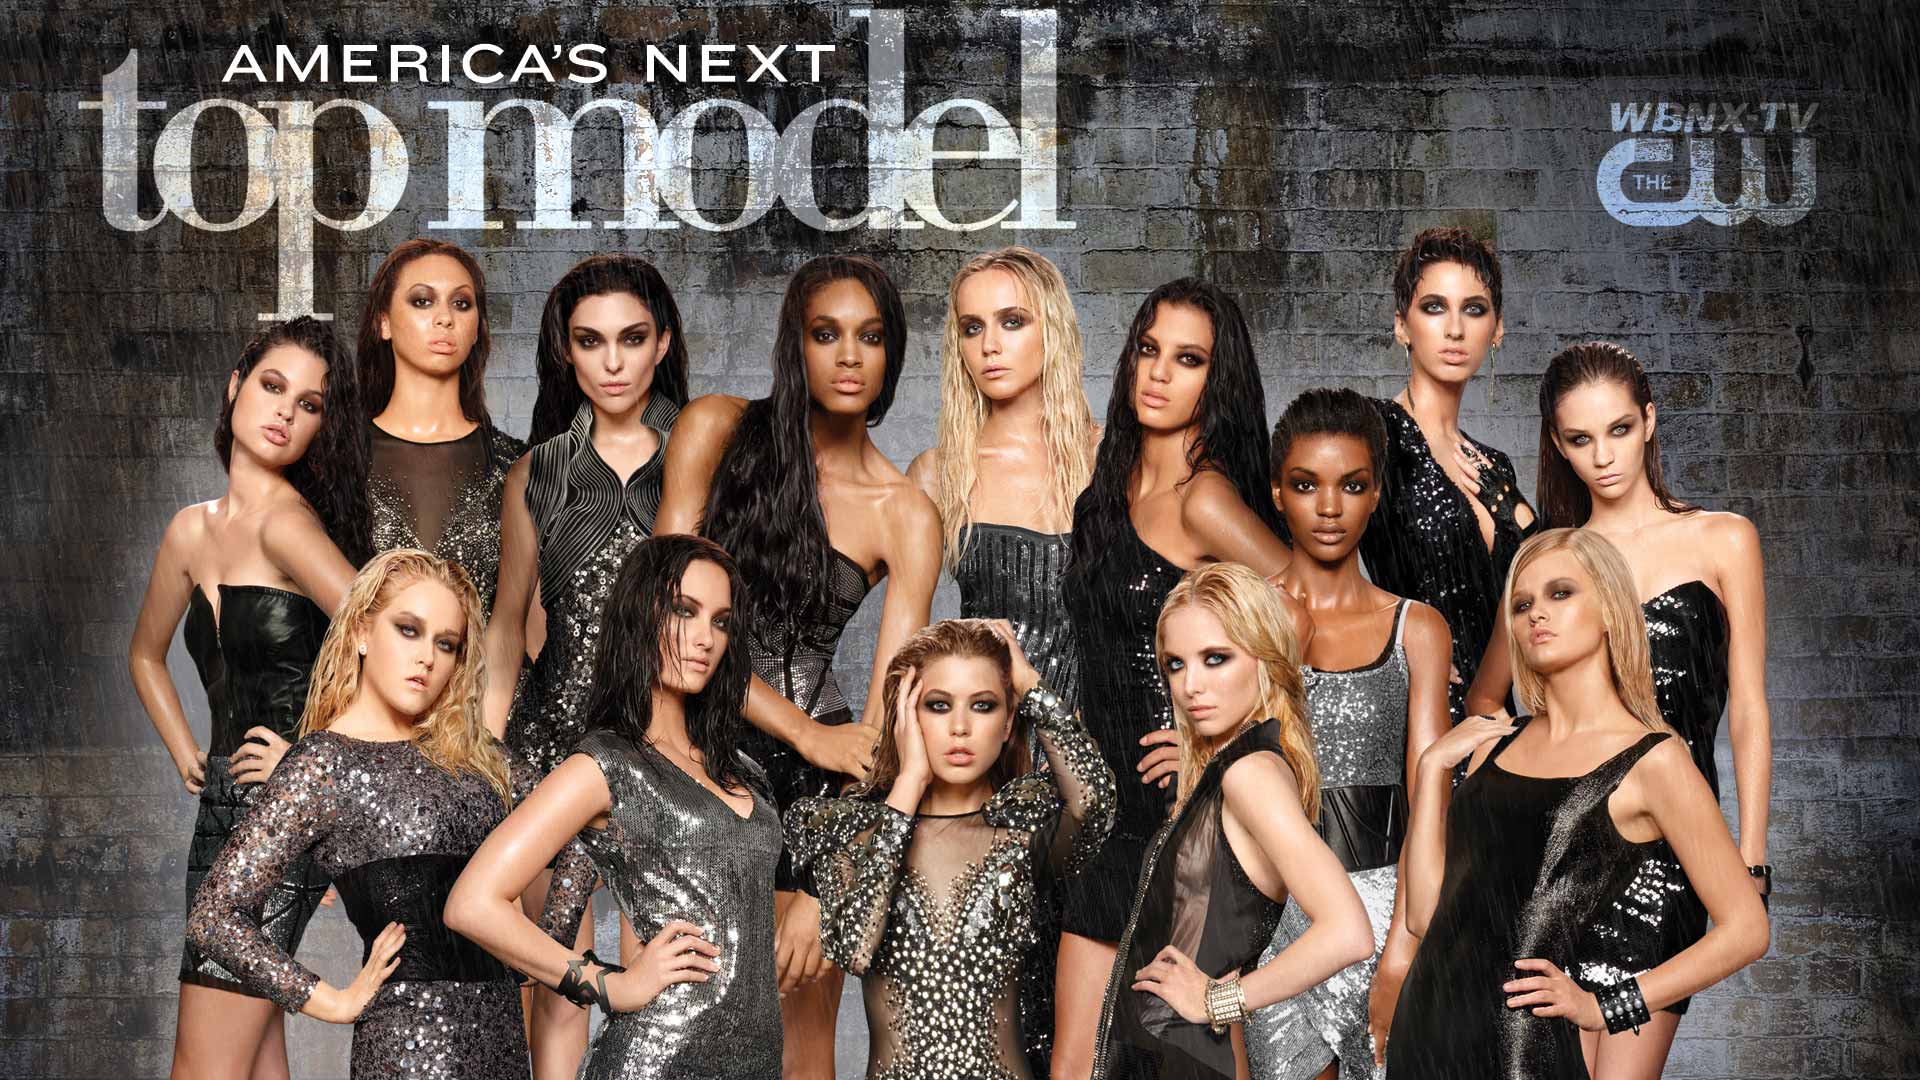 Is America’s Next Top Model fake?